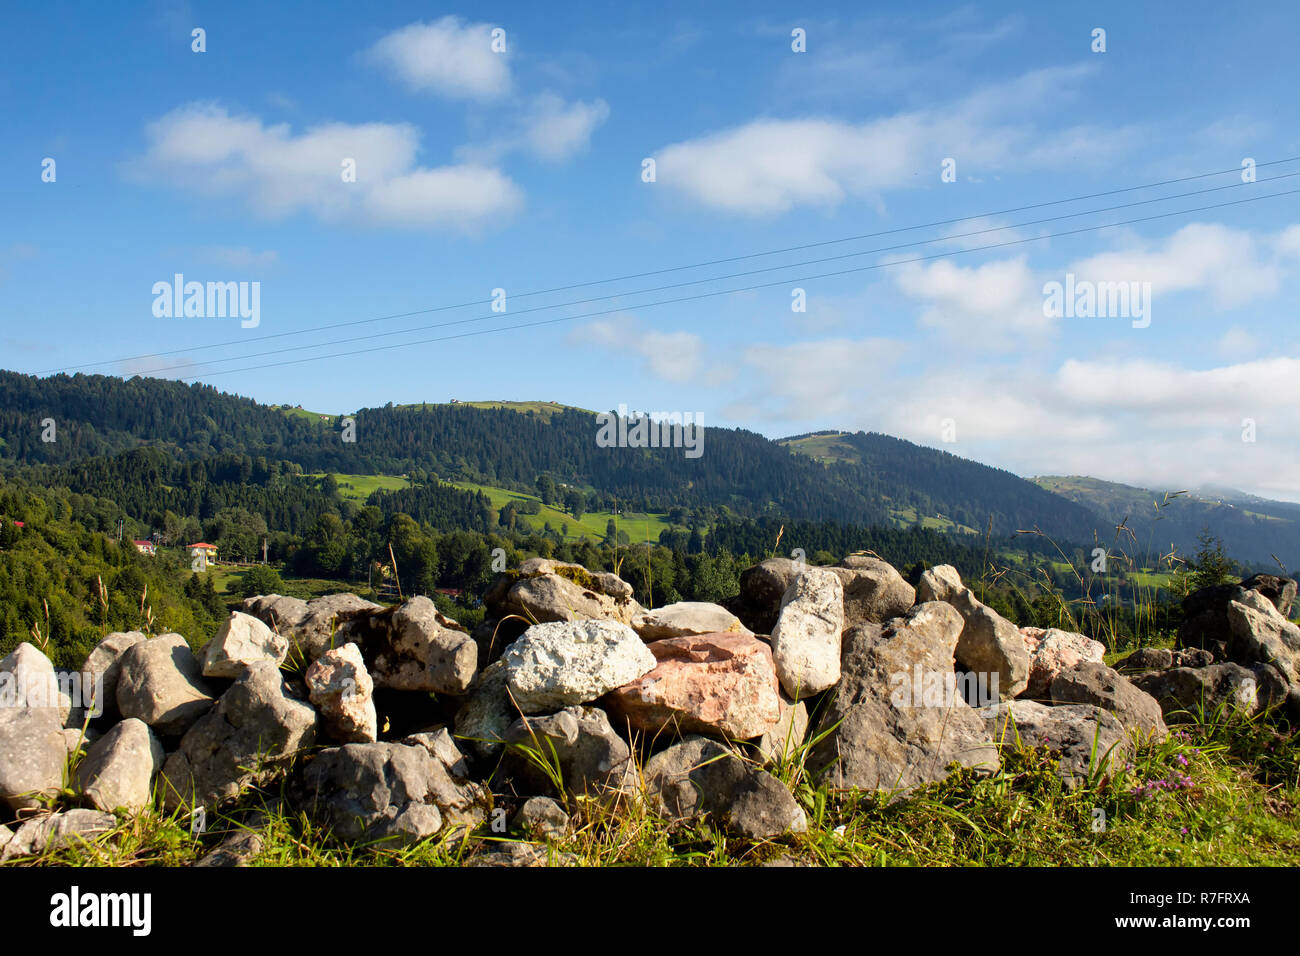 View of rocks, mountains, forest creating beautiful nature scene. The image is captured in Trabzon/Rize area of Black Sea region located at northeast  Stock Photo